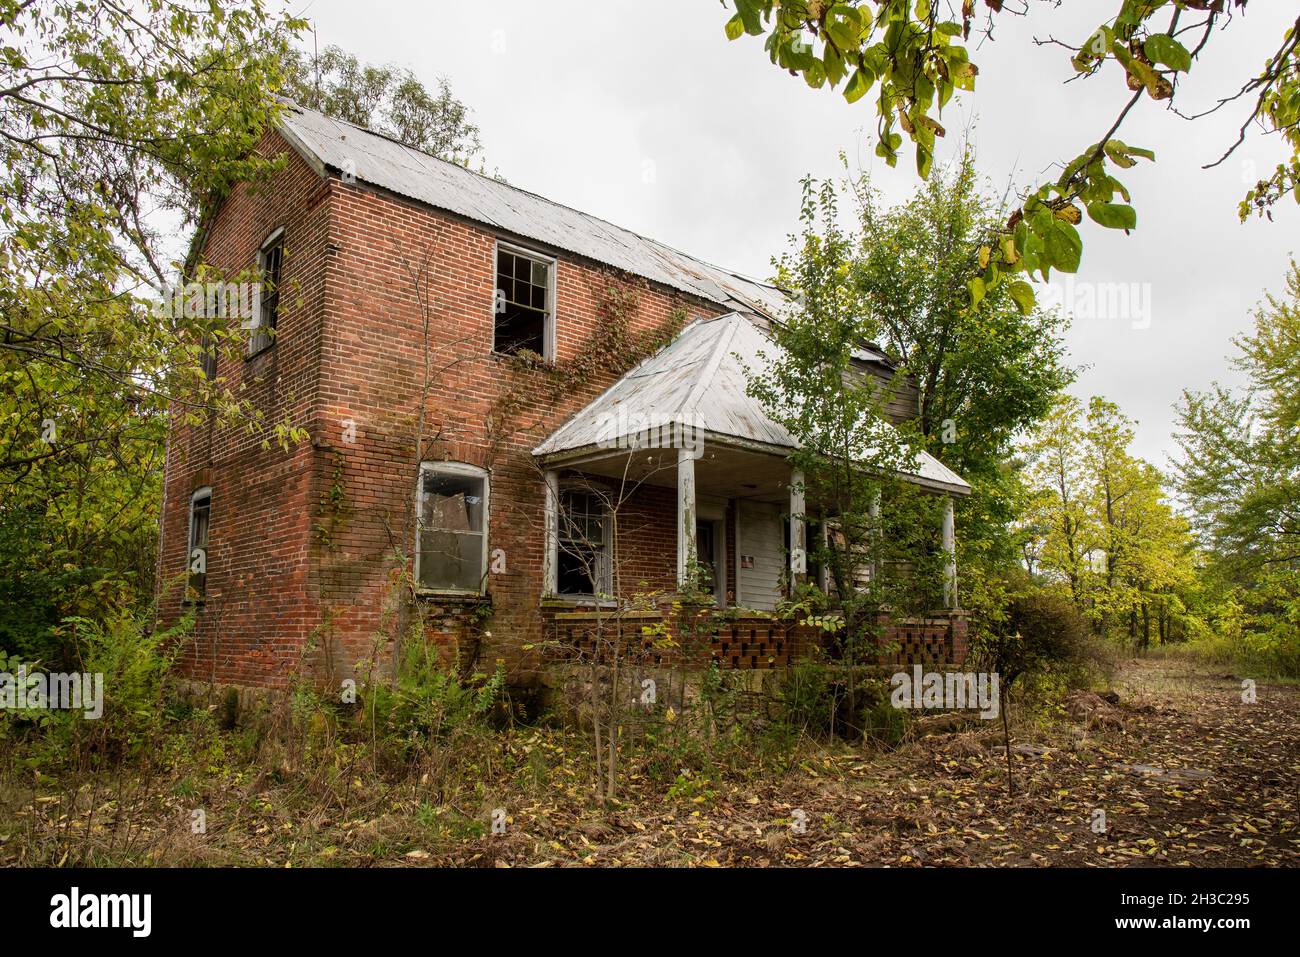 An abandoned brick house wit a hip roof over the porch in the midwest in the United States. Stock Photo